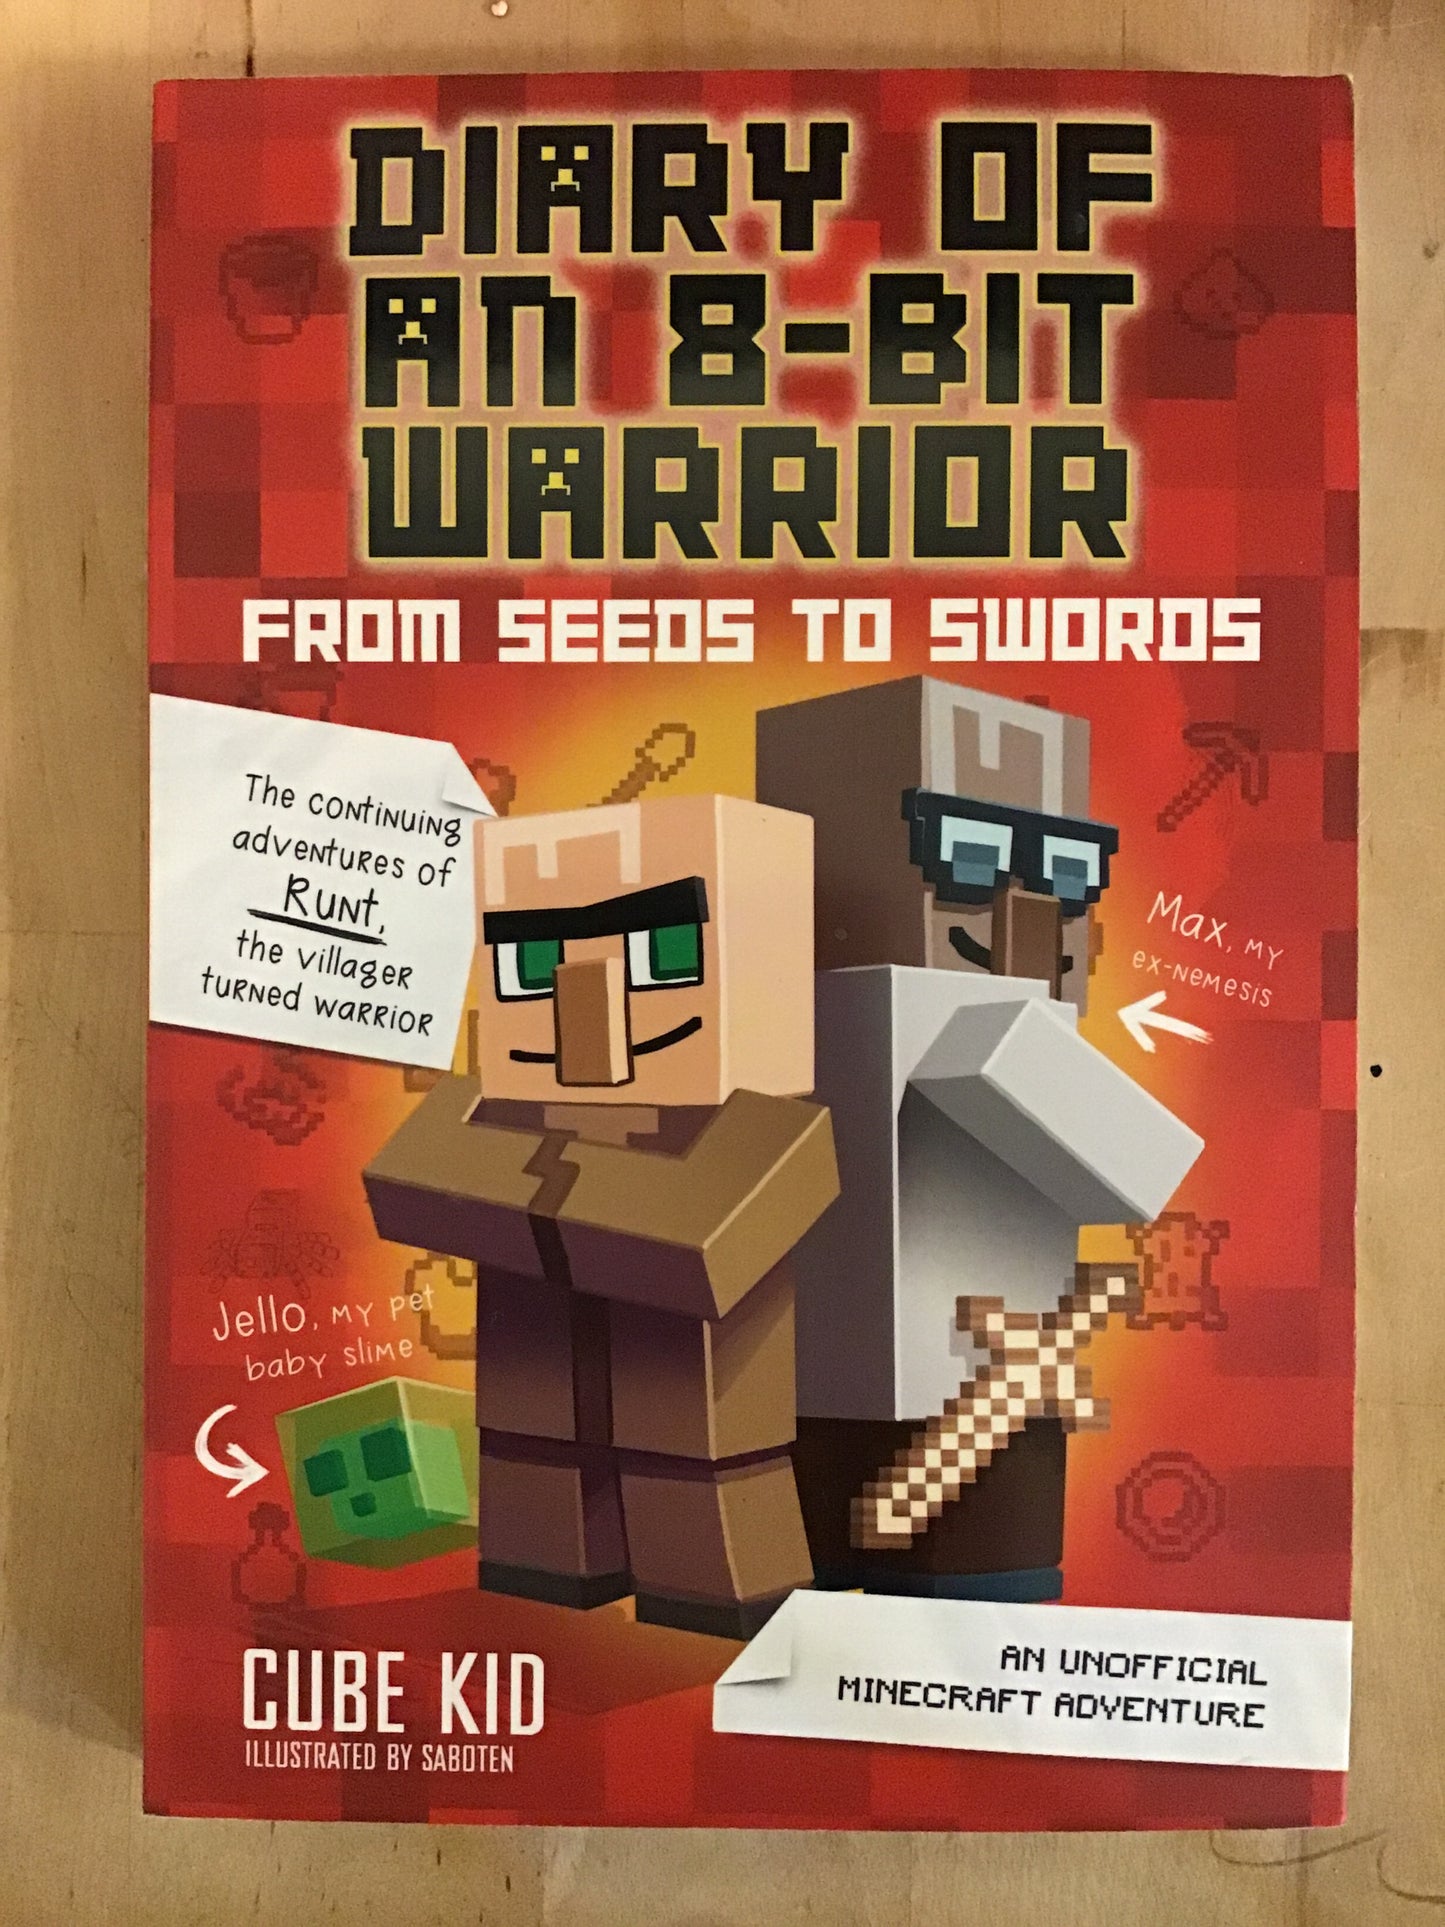 Diary of an 8-Bit Warrior: From Seeds to Swords (#2)